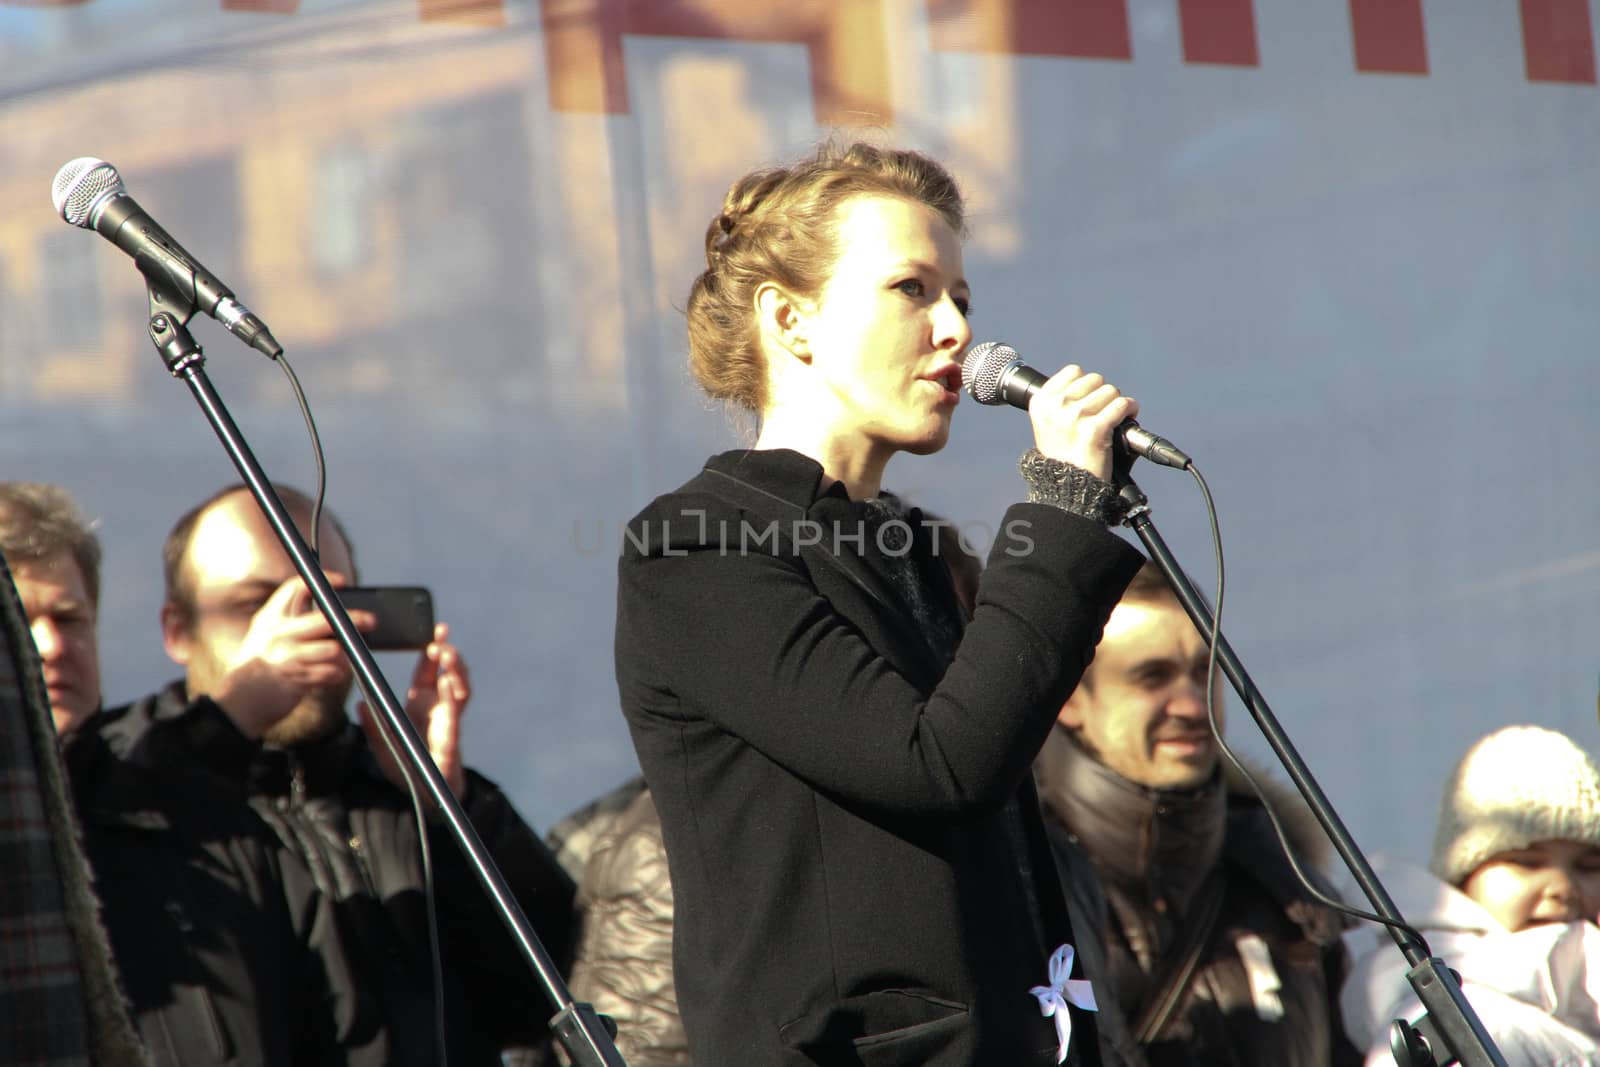 Moscow, Russia - March 10, 2012. TV Presenter Ksenia Sobchak on an opposition rally on election results